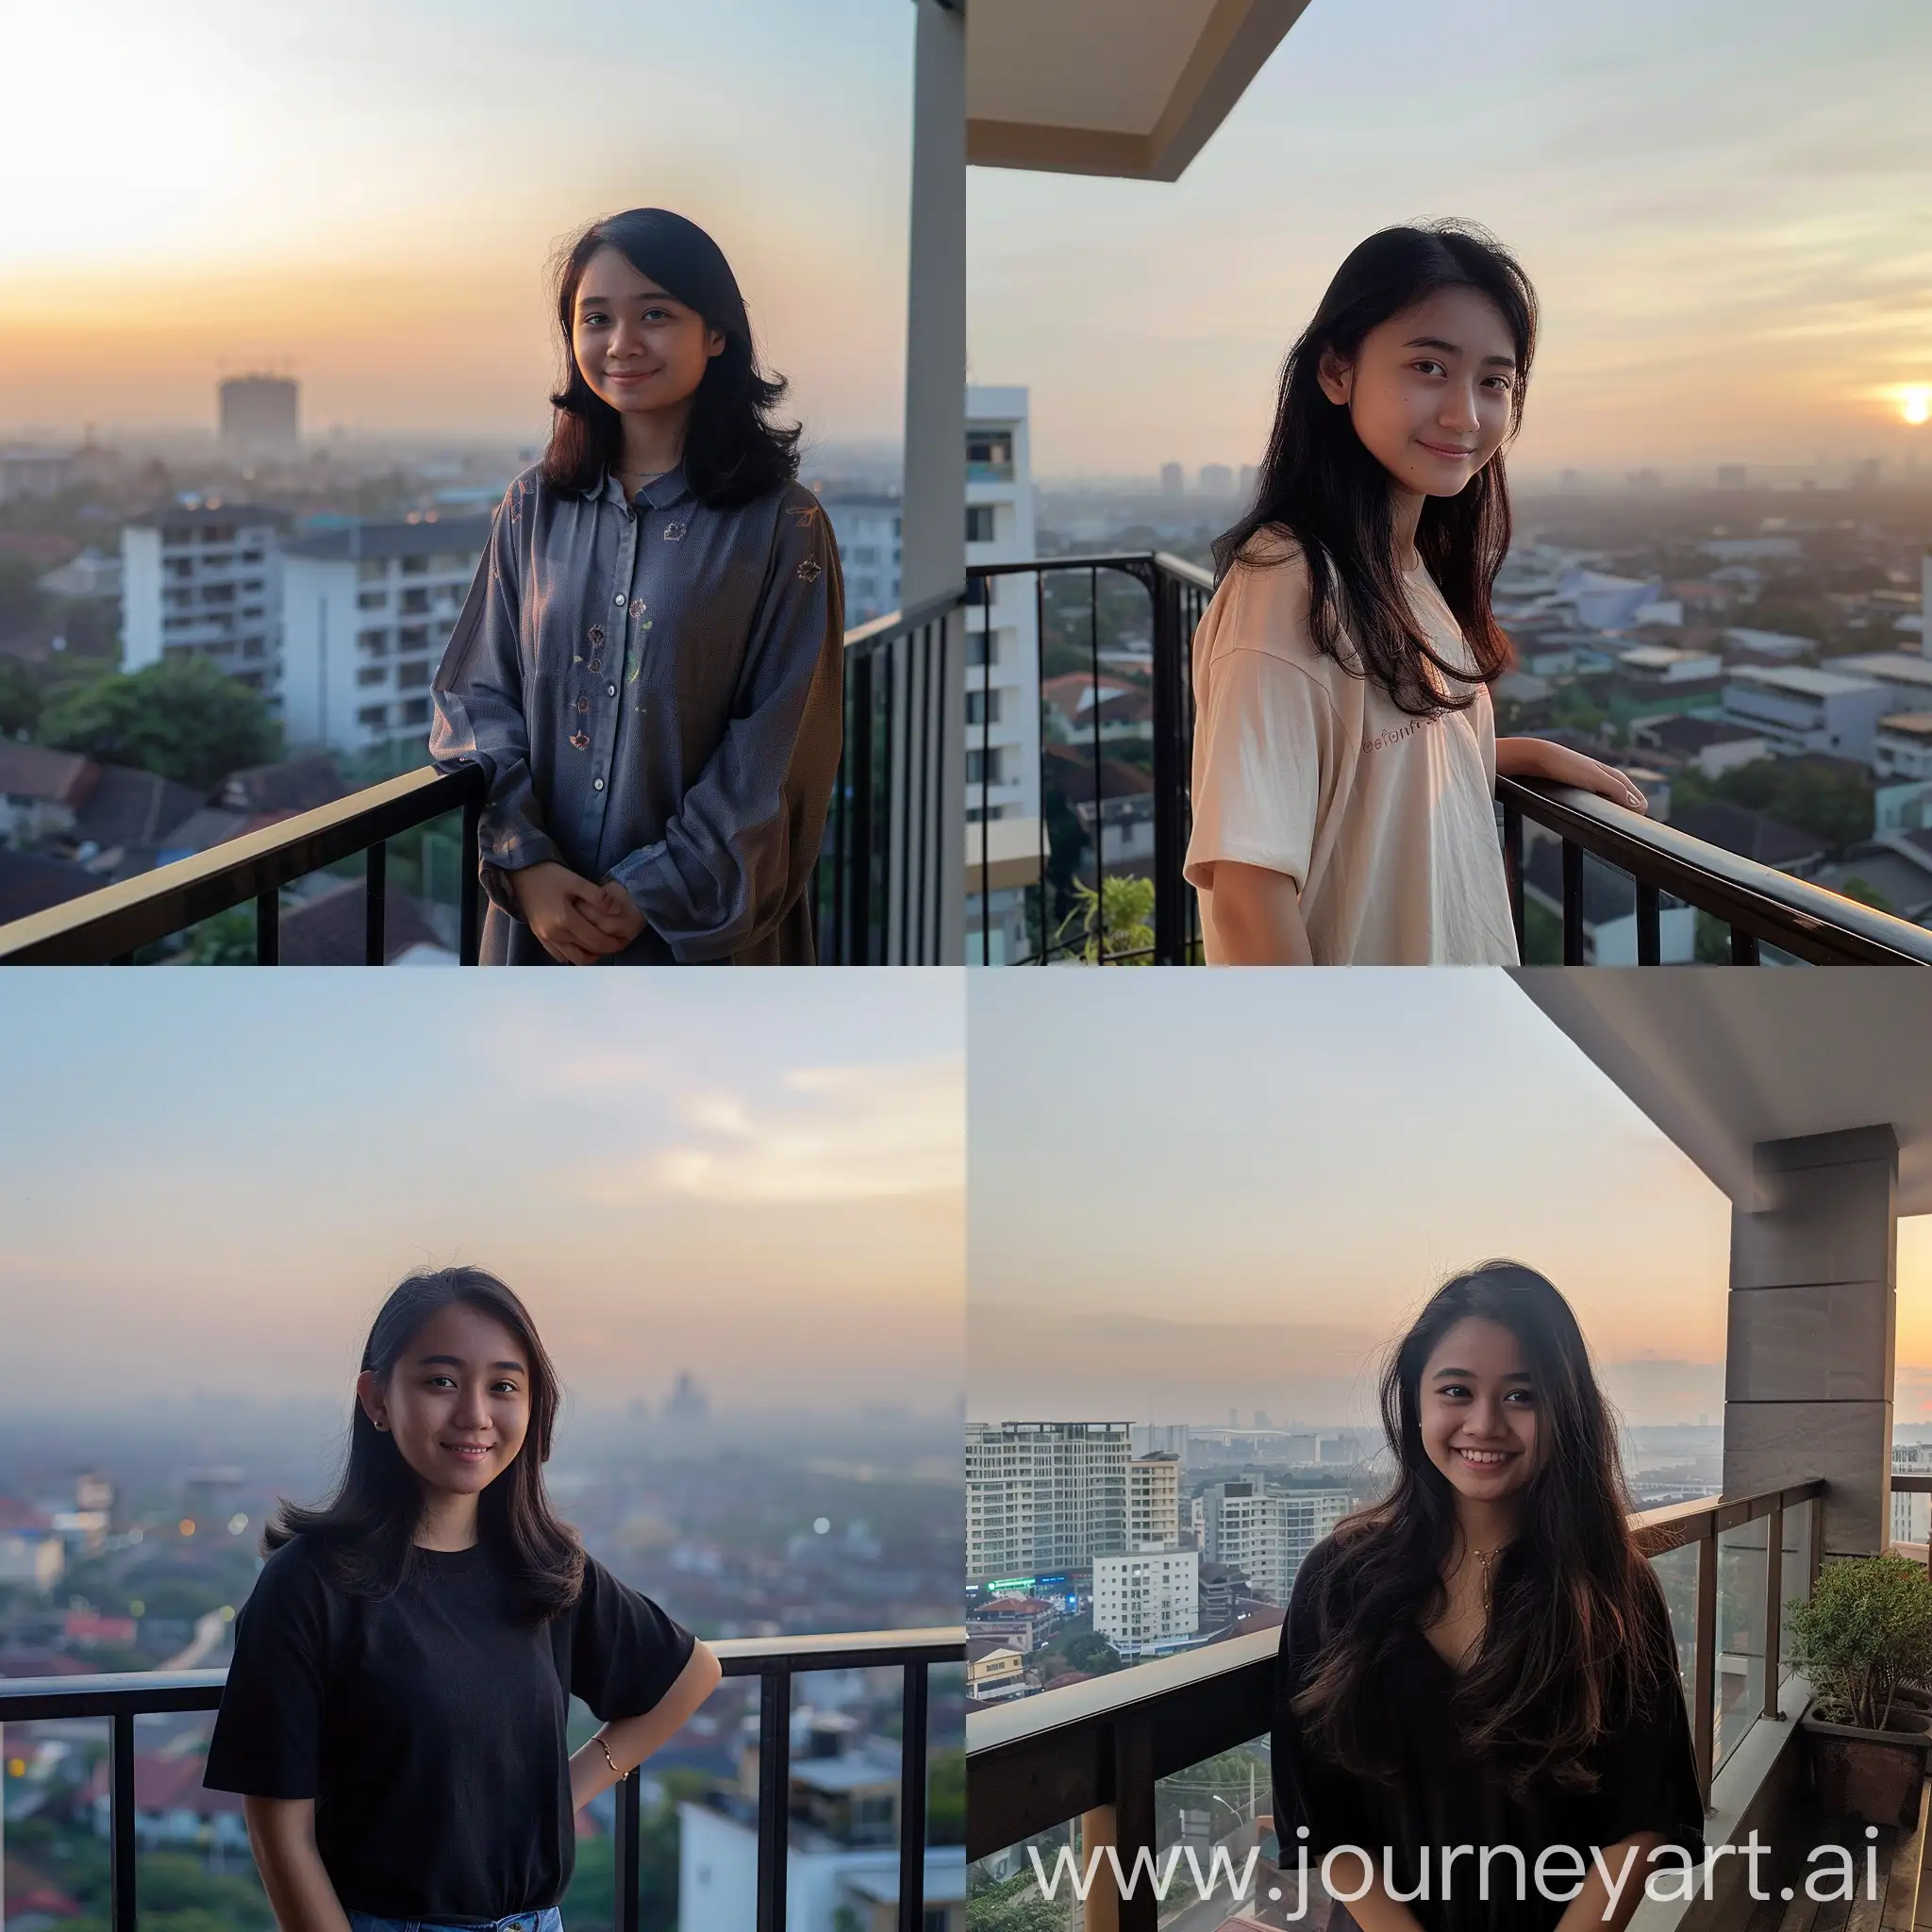 23 years old Indonesian girl, standing before a balcony railing, on an apartment, city panorama, early morning, satisfied expression